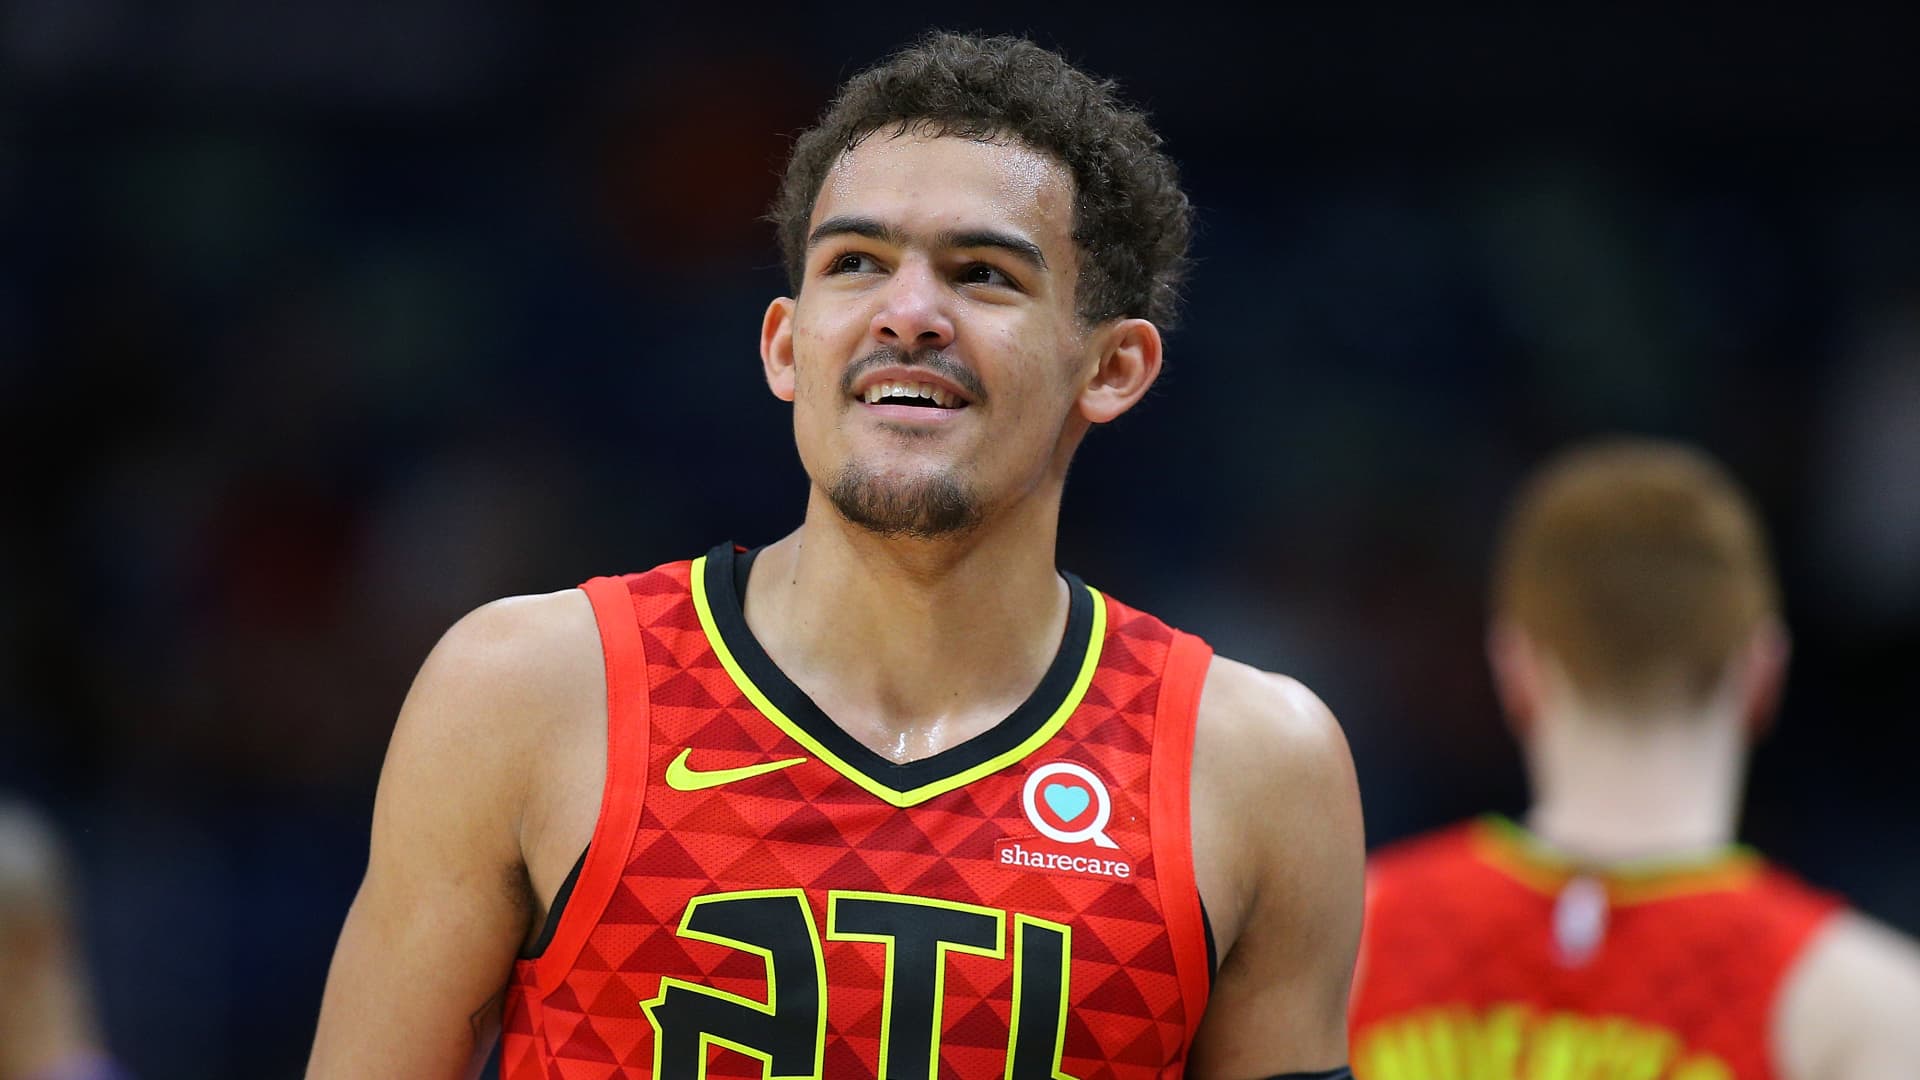 Oklahoma's Trae Young is having one of the best seasons in college